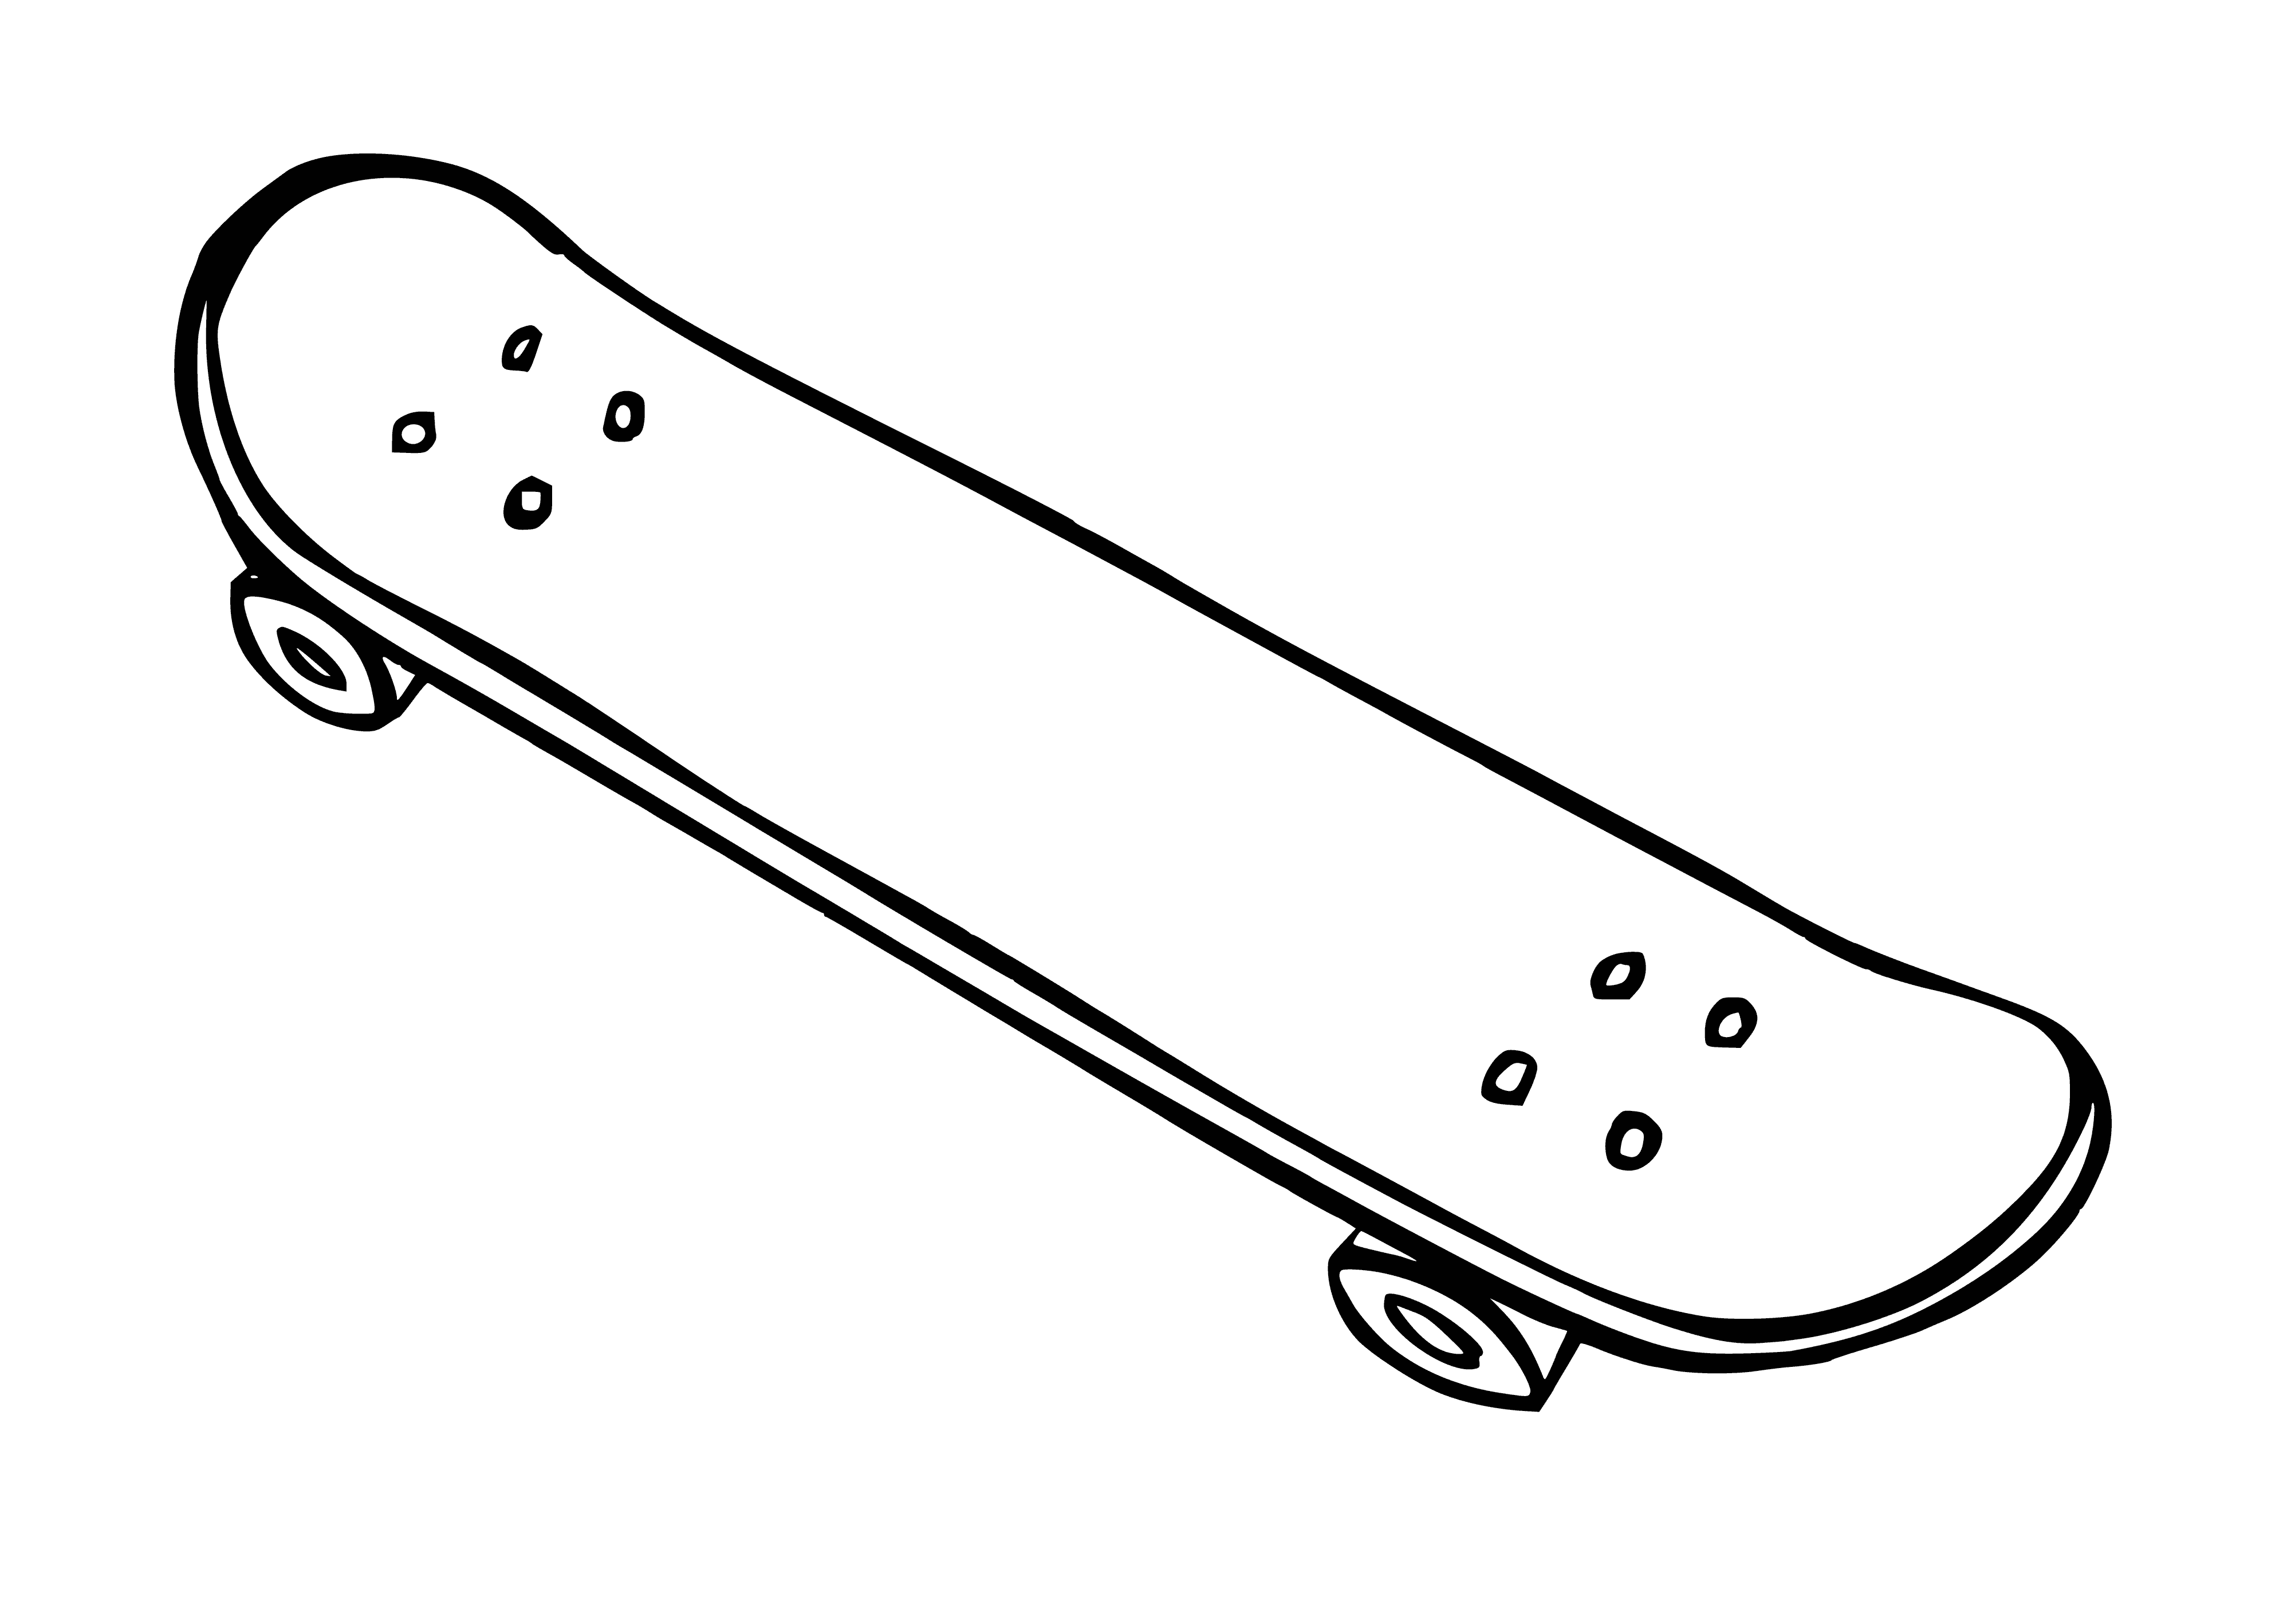 Skateboard coloring page